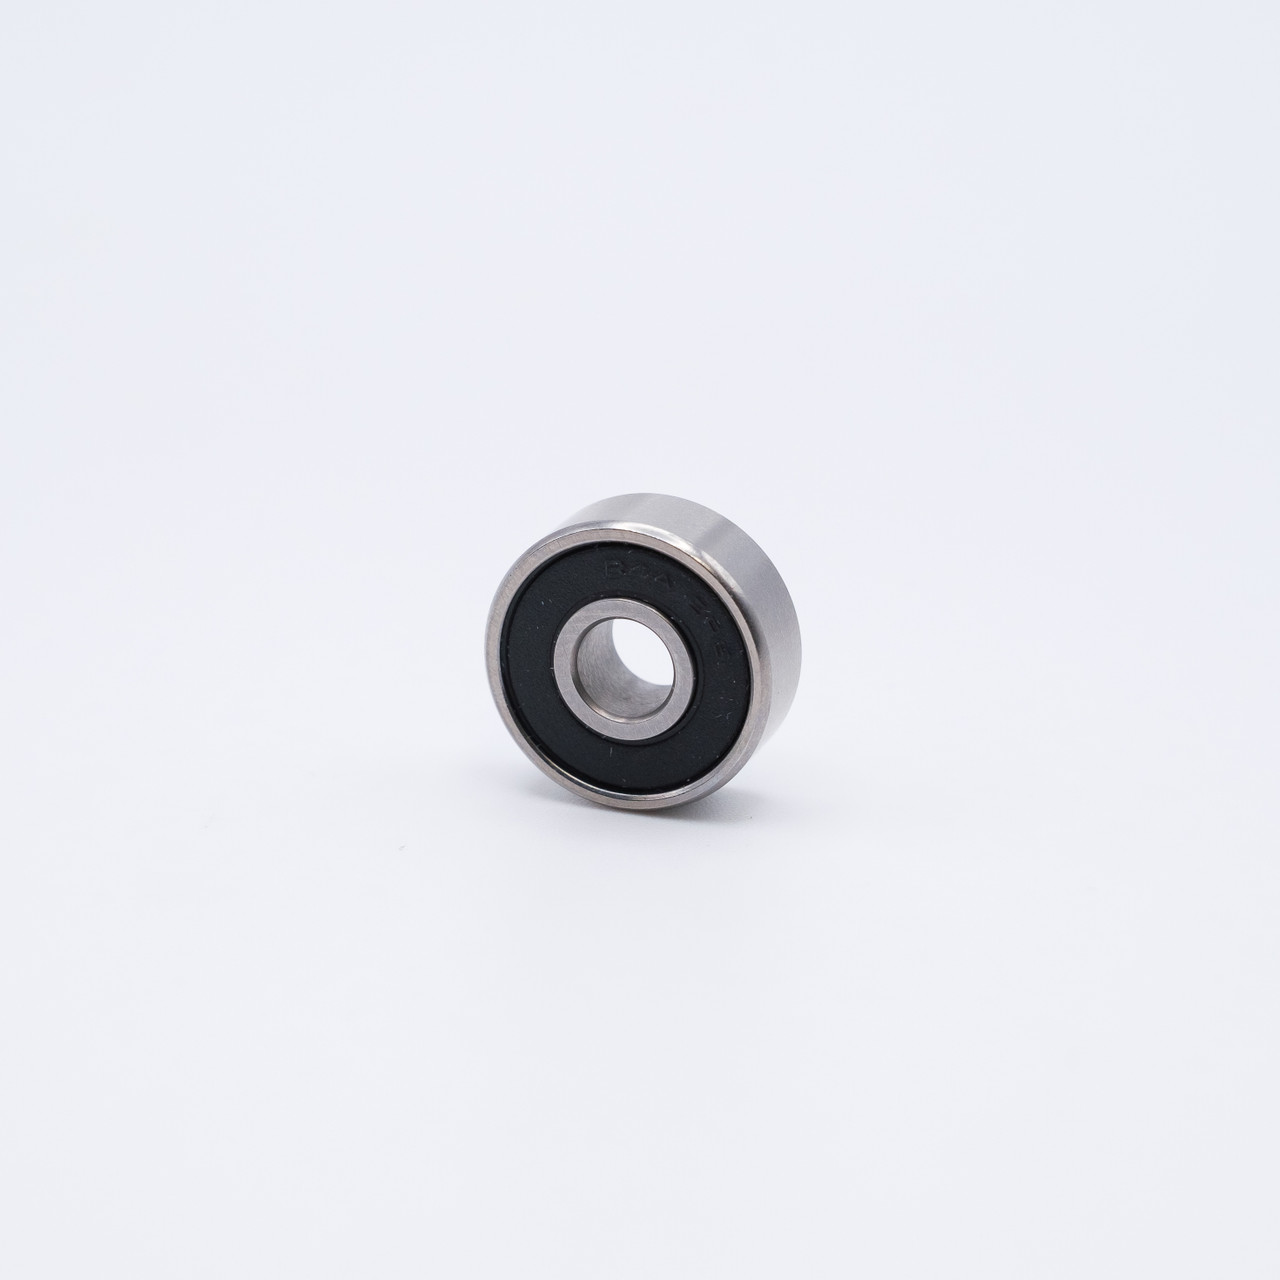 S608-2RSC Stainless Steel Ceramic Ball Bearing 8x22x7 Side View